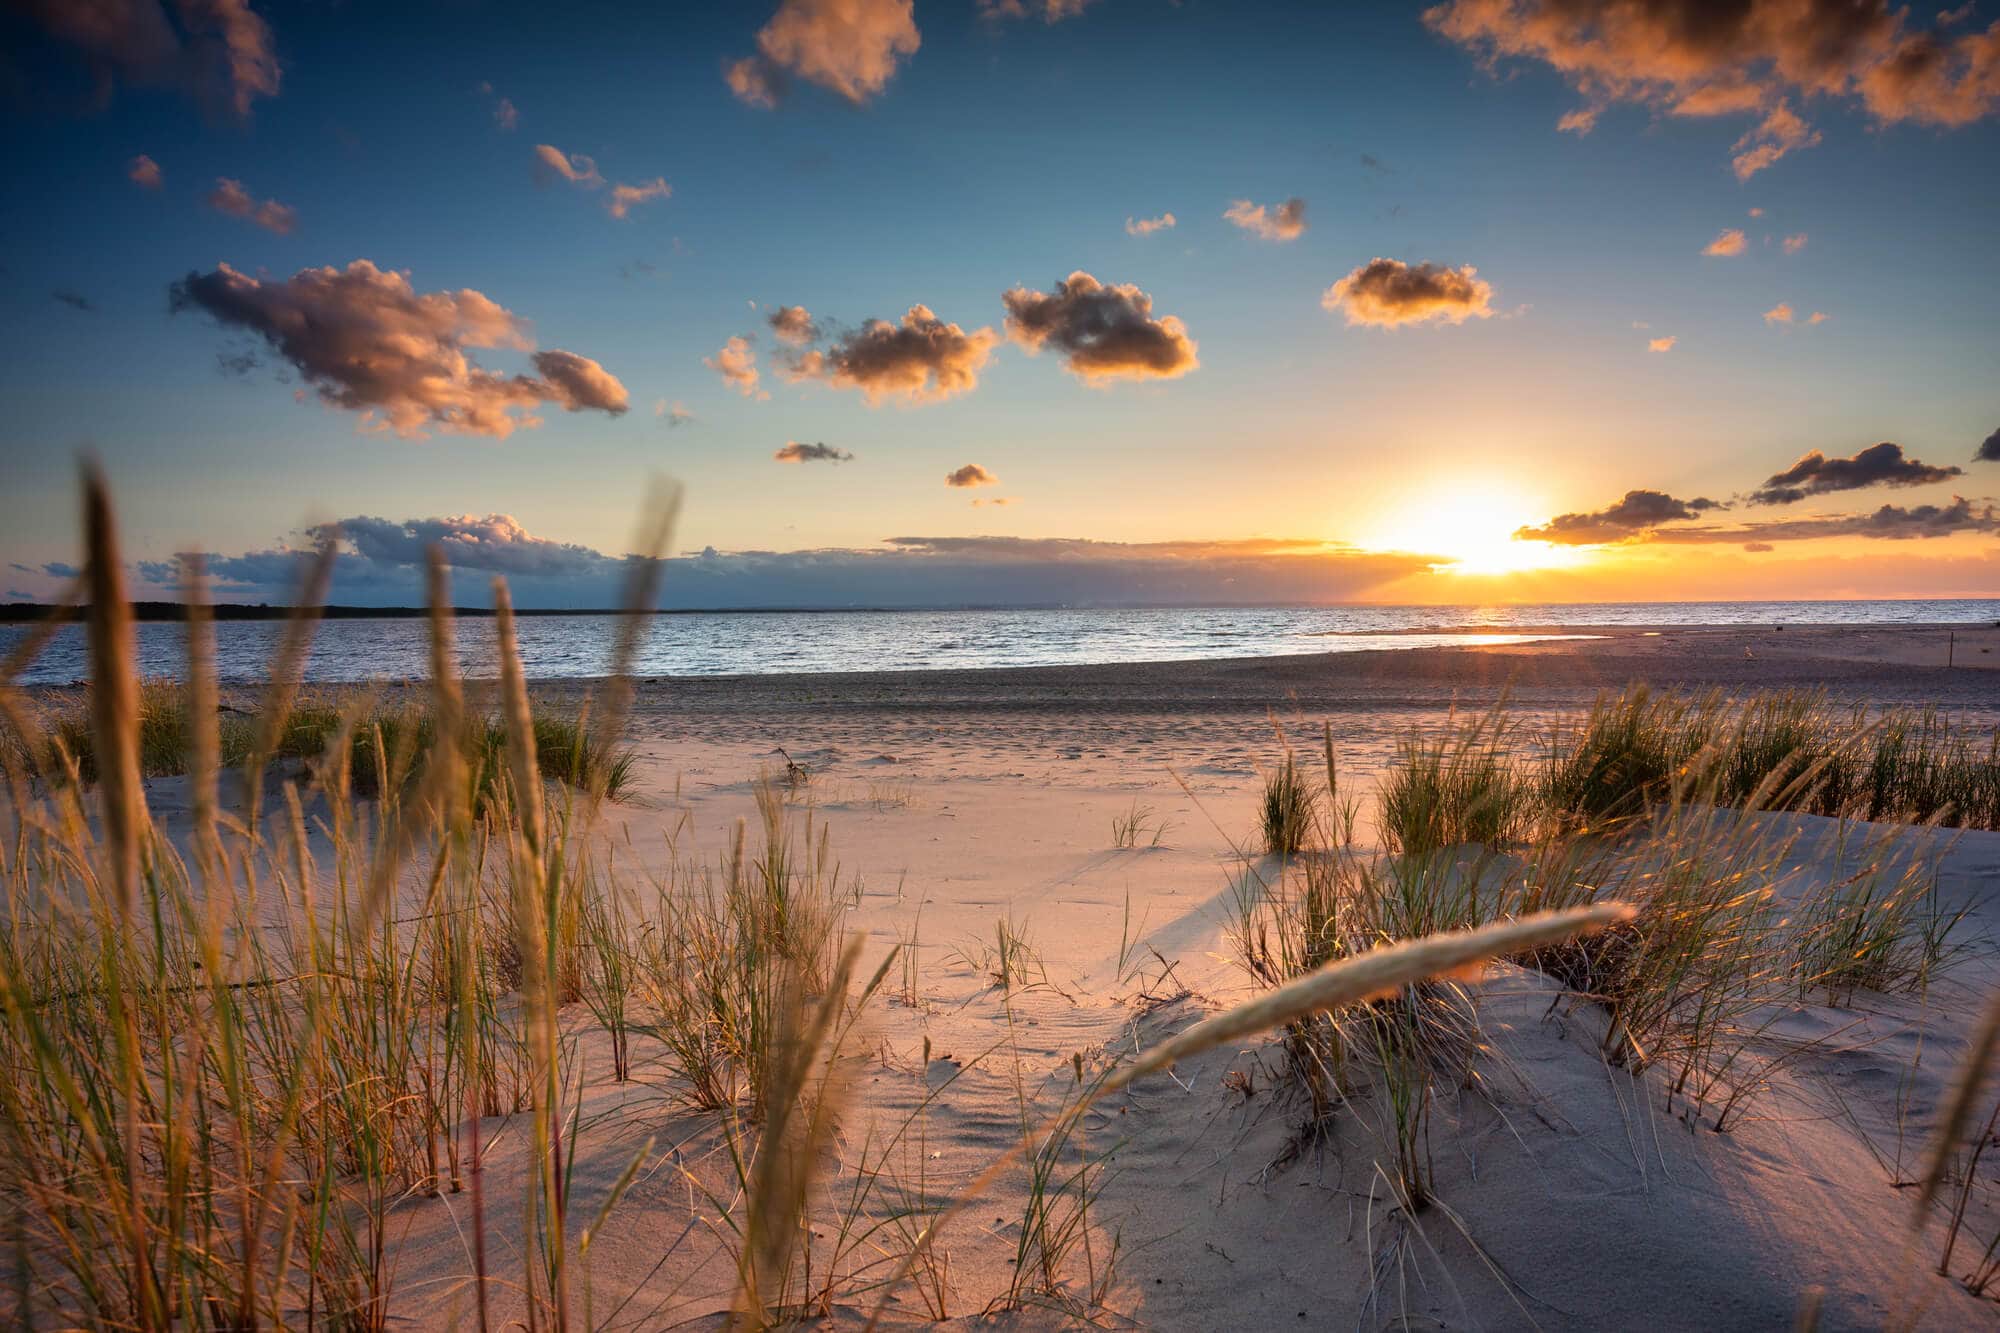 Sunset over a beach on Sobieszewo Island, the perfect day trip from Gdansk